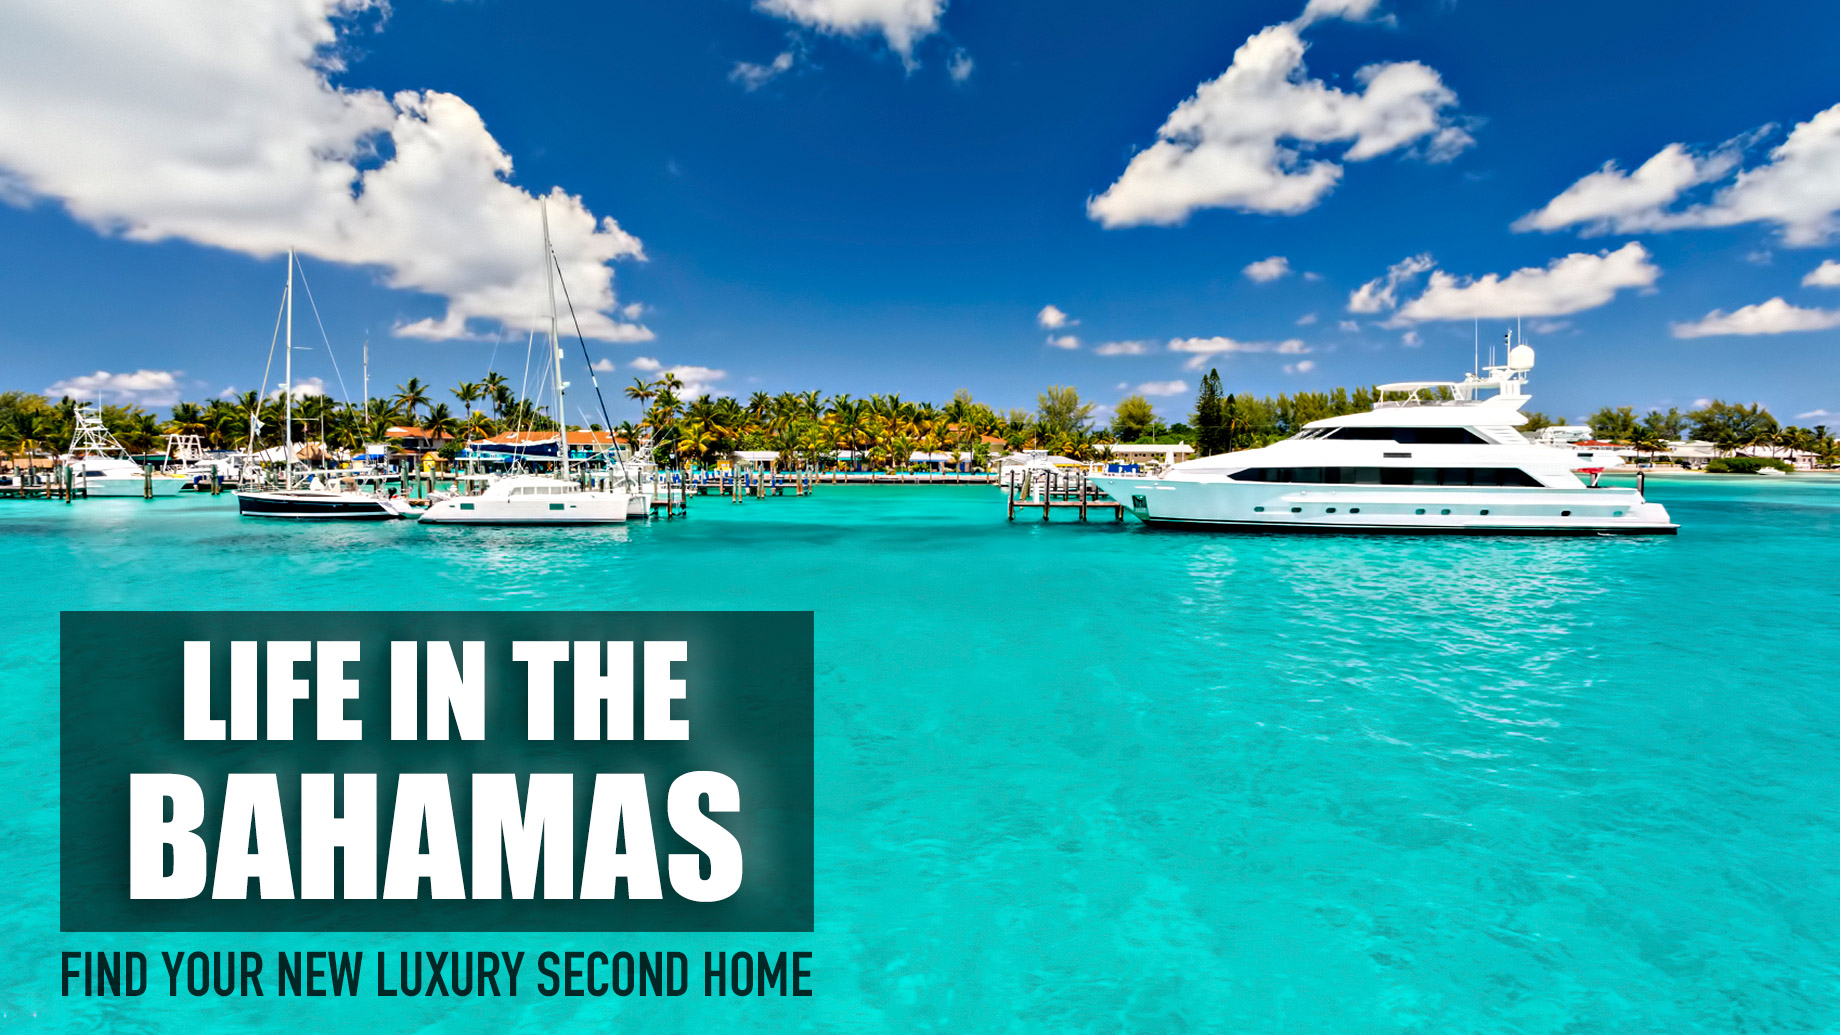 Life in the Bahamas - Find Your New Luxury Second Home